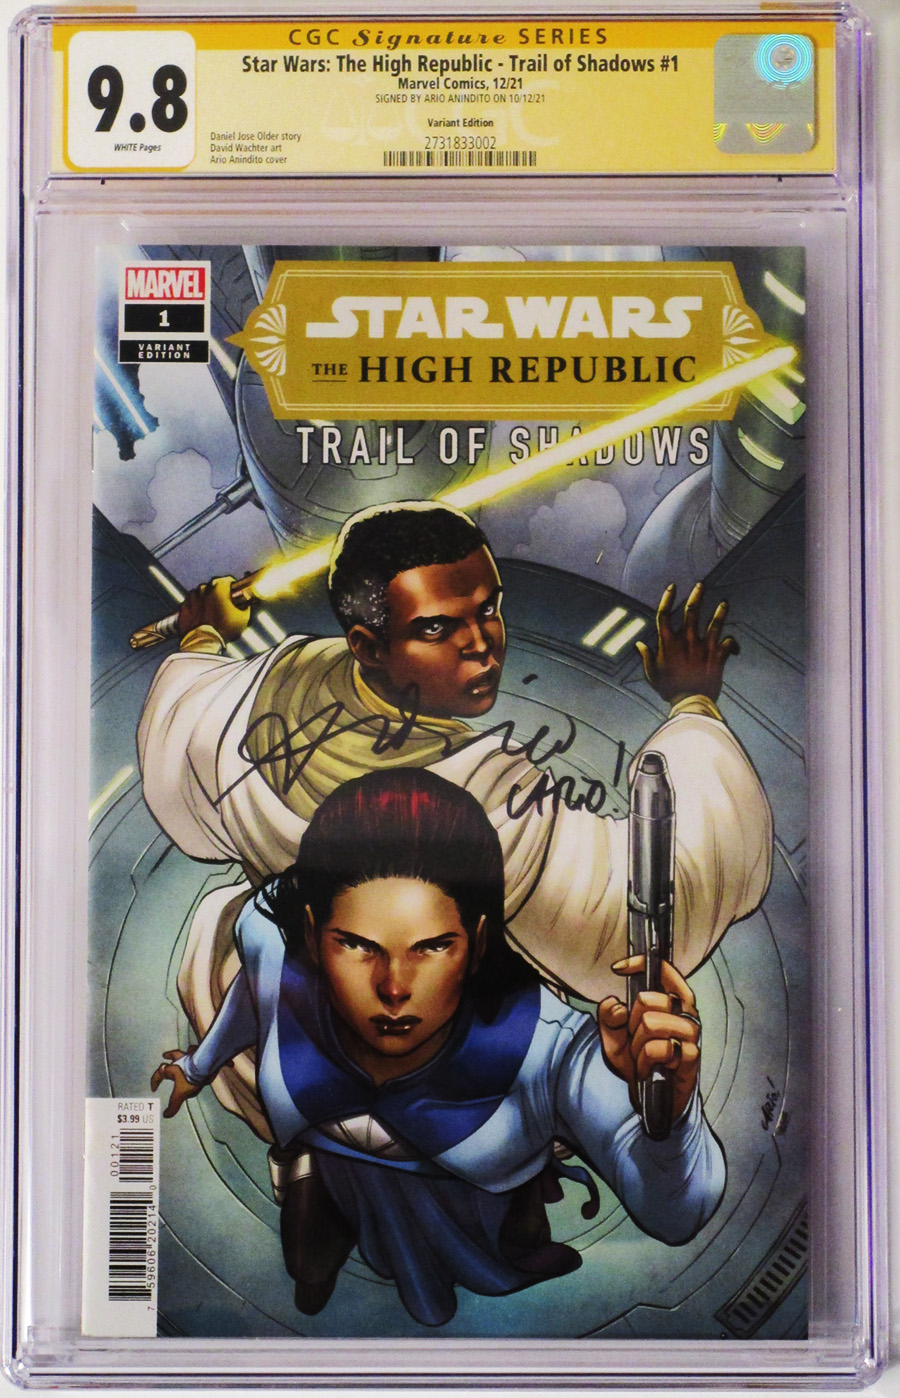 Star Wars High Republic Trail Of Shadows #1 Cover E Variant Ario Anindito Cover Signed by Ario Anindito CGC Graded 9.8